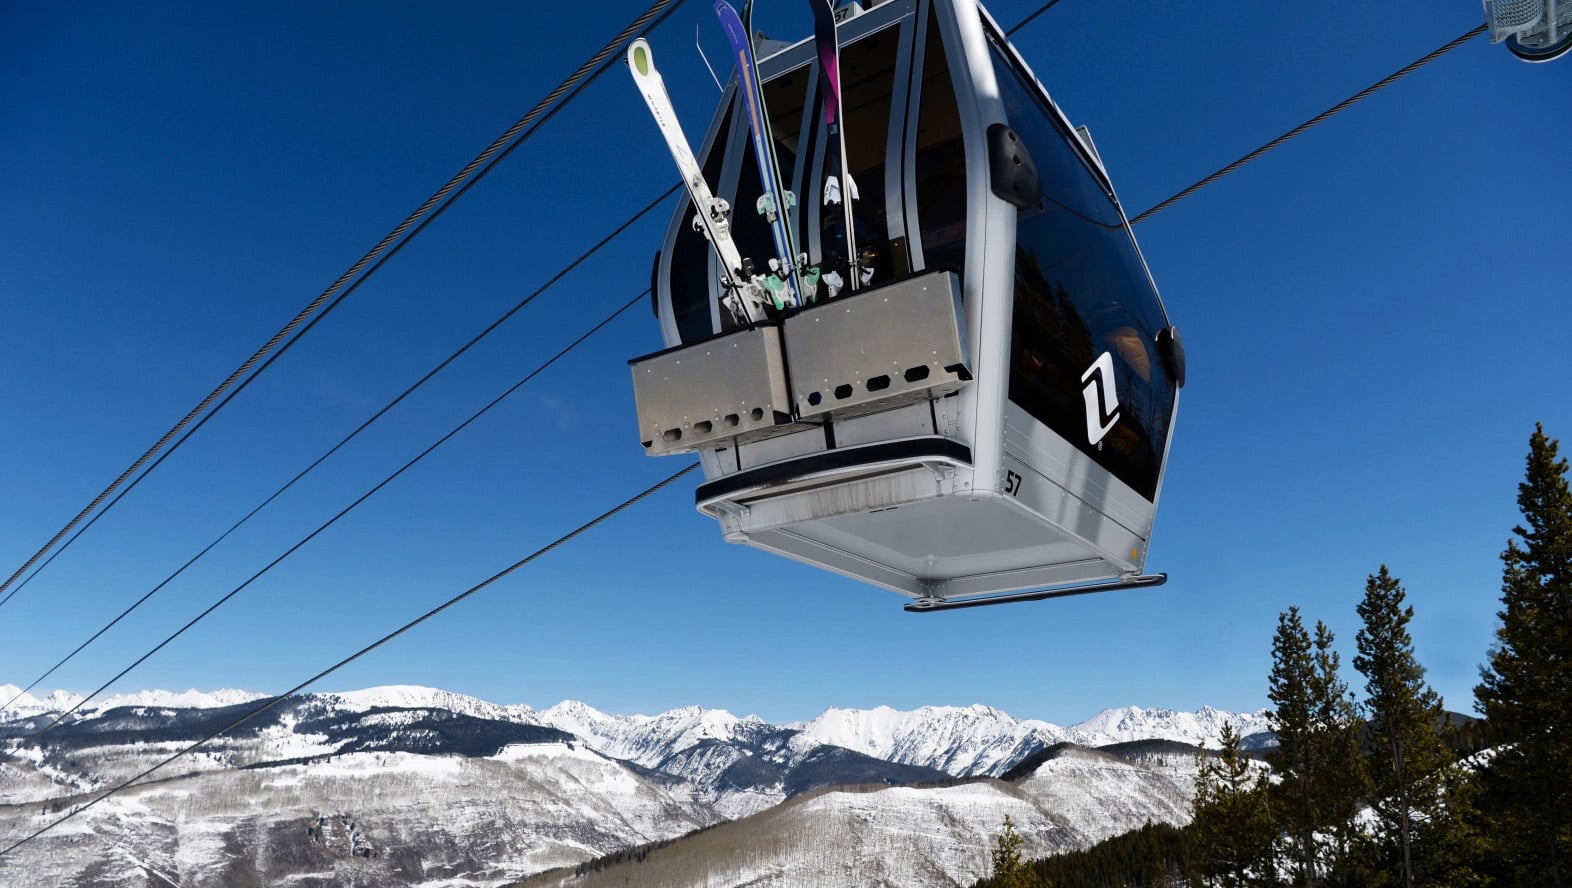 Vail Resorts is suing the Town of Vail